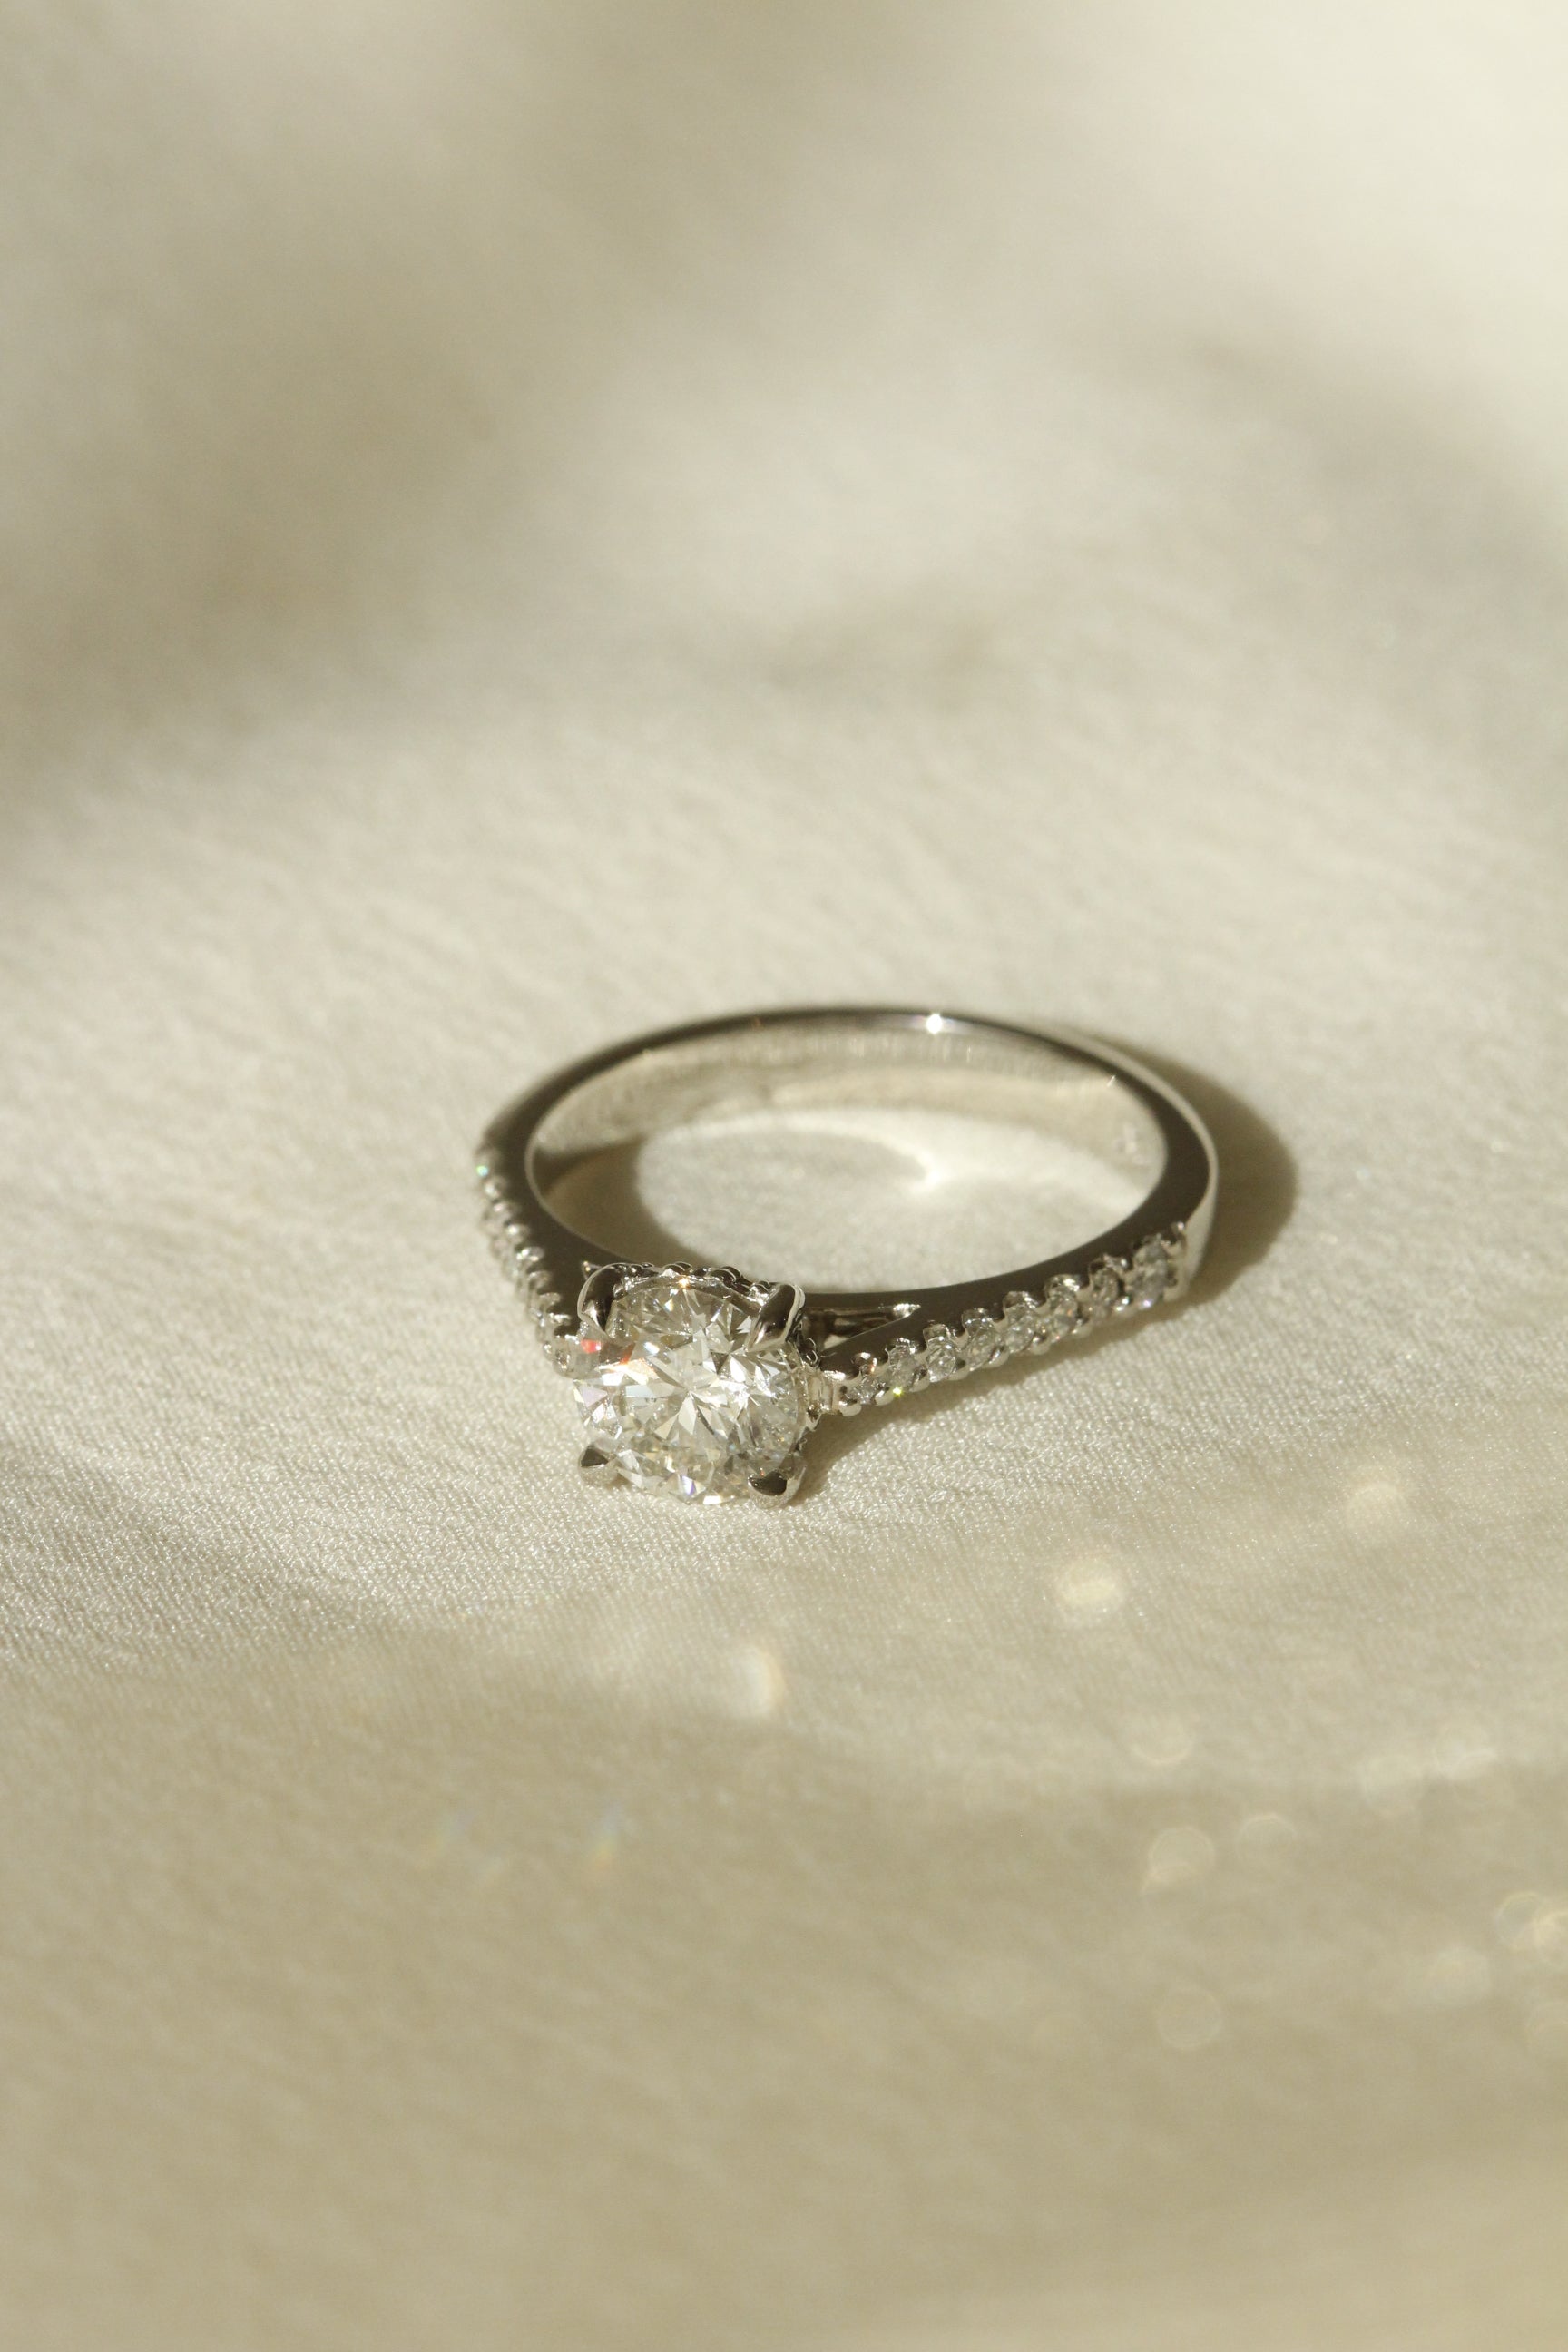 Solitaire engagement ring in 18k white gold with diamonds on side of band Bernini setting by Orsini Fine Jewellery